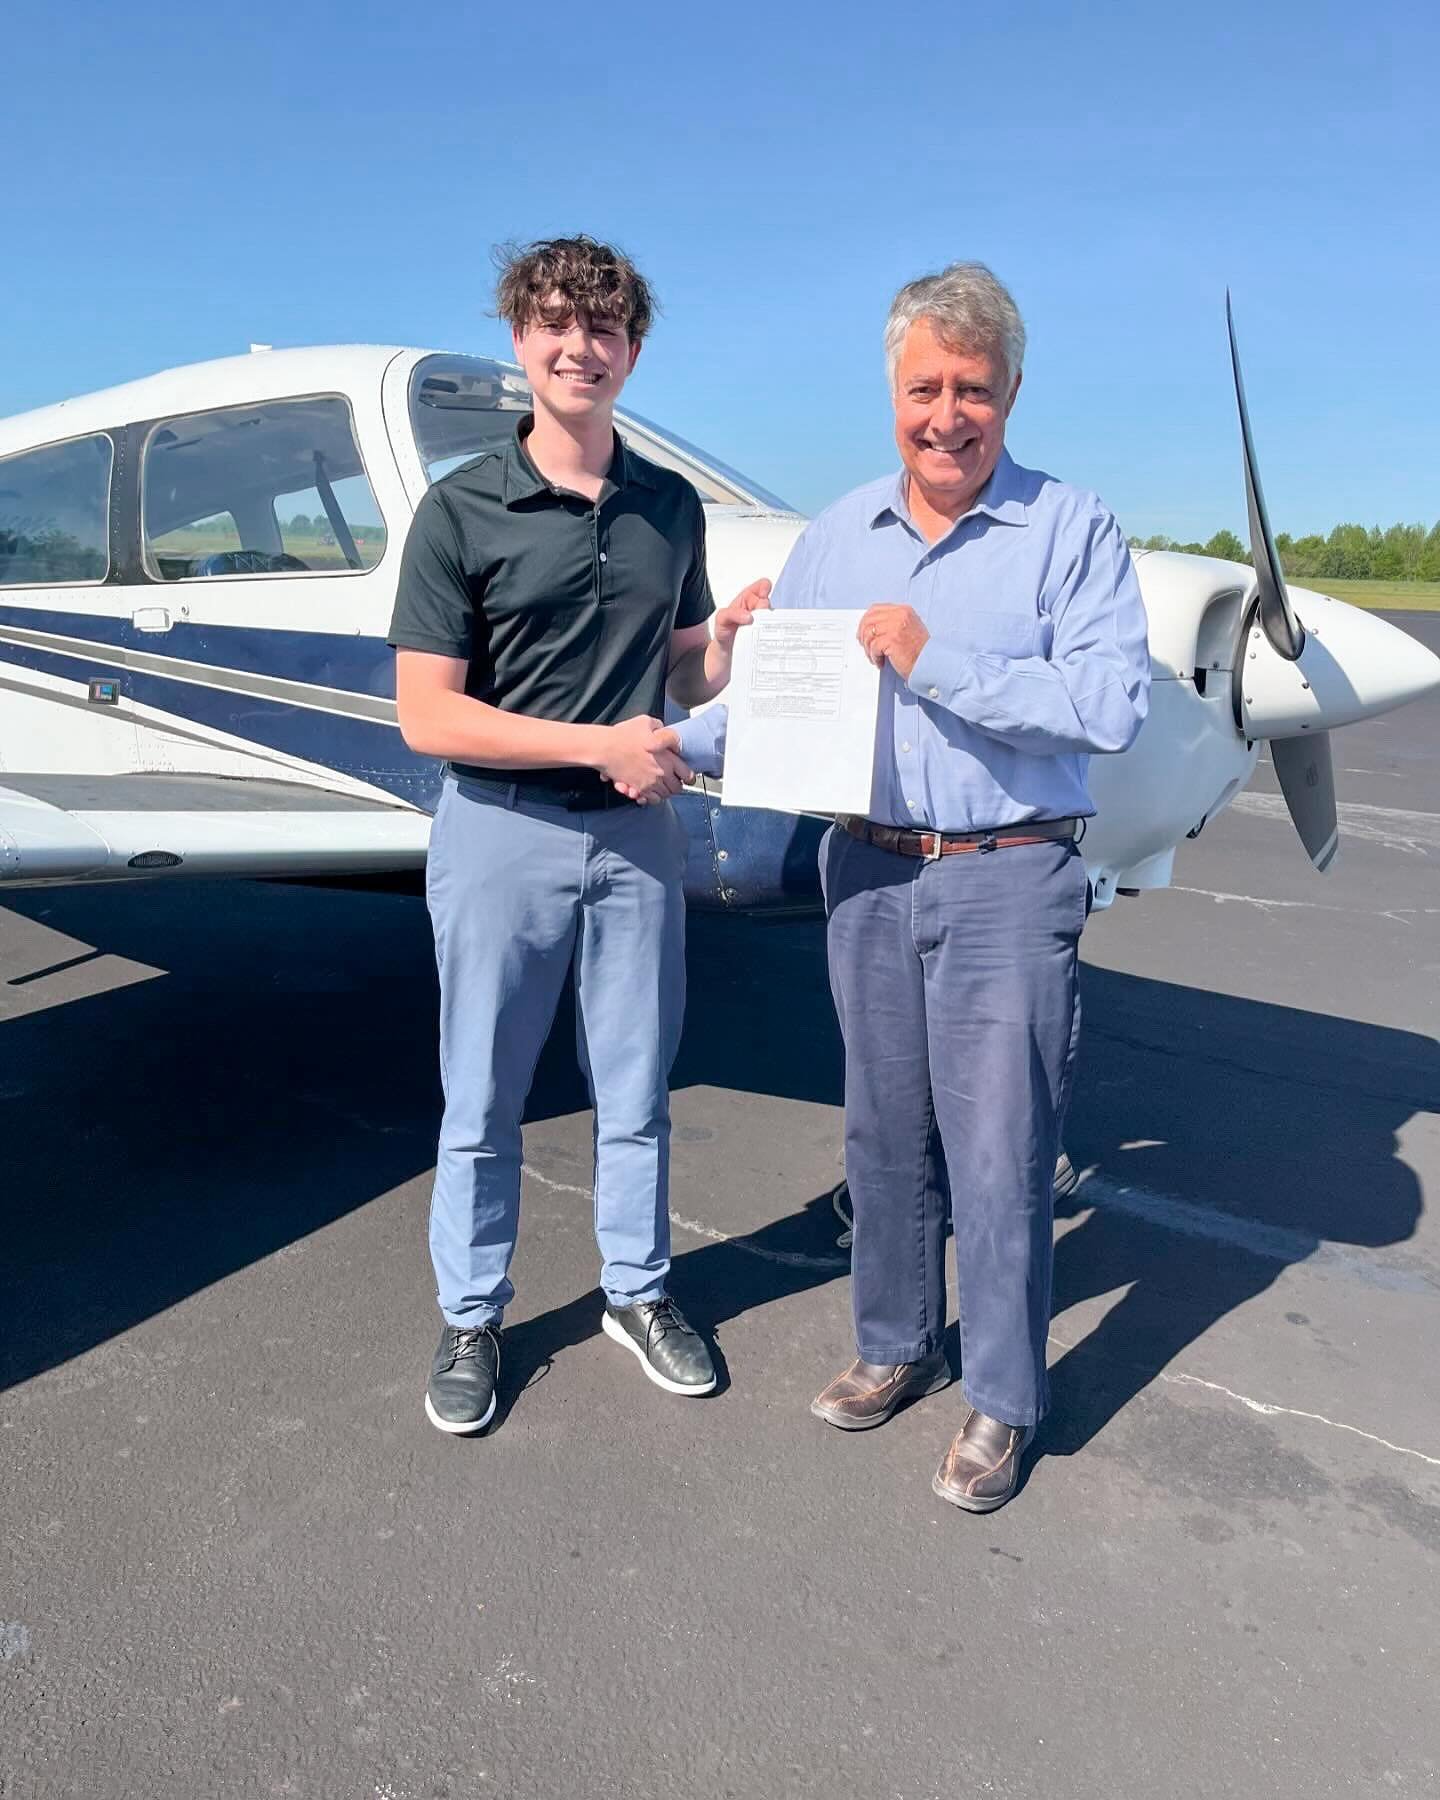 Congrats to Academy graduate Levi on passing his PPL ride today! Watching you grow from the little boy who was obsessed with airplanes (and still is) into the pilot you are today has been truly inspiring, and we are honored to share this journey with